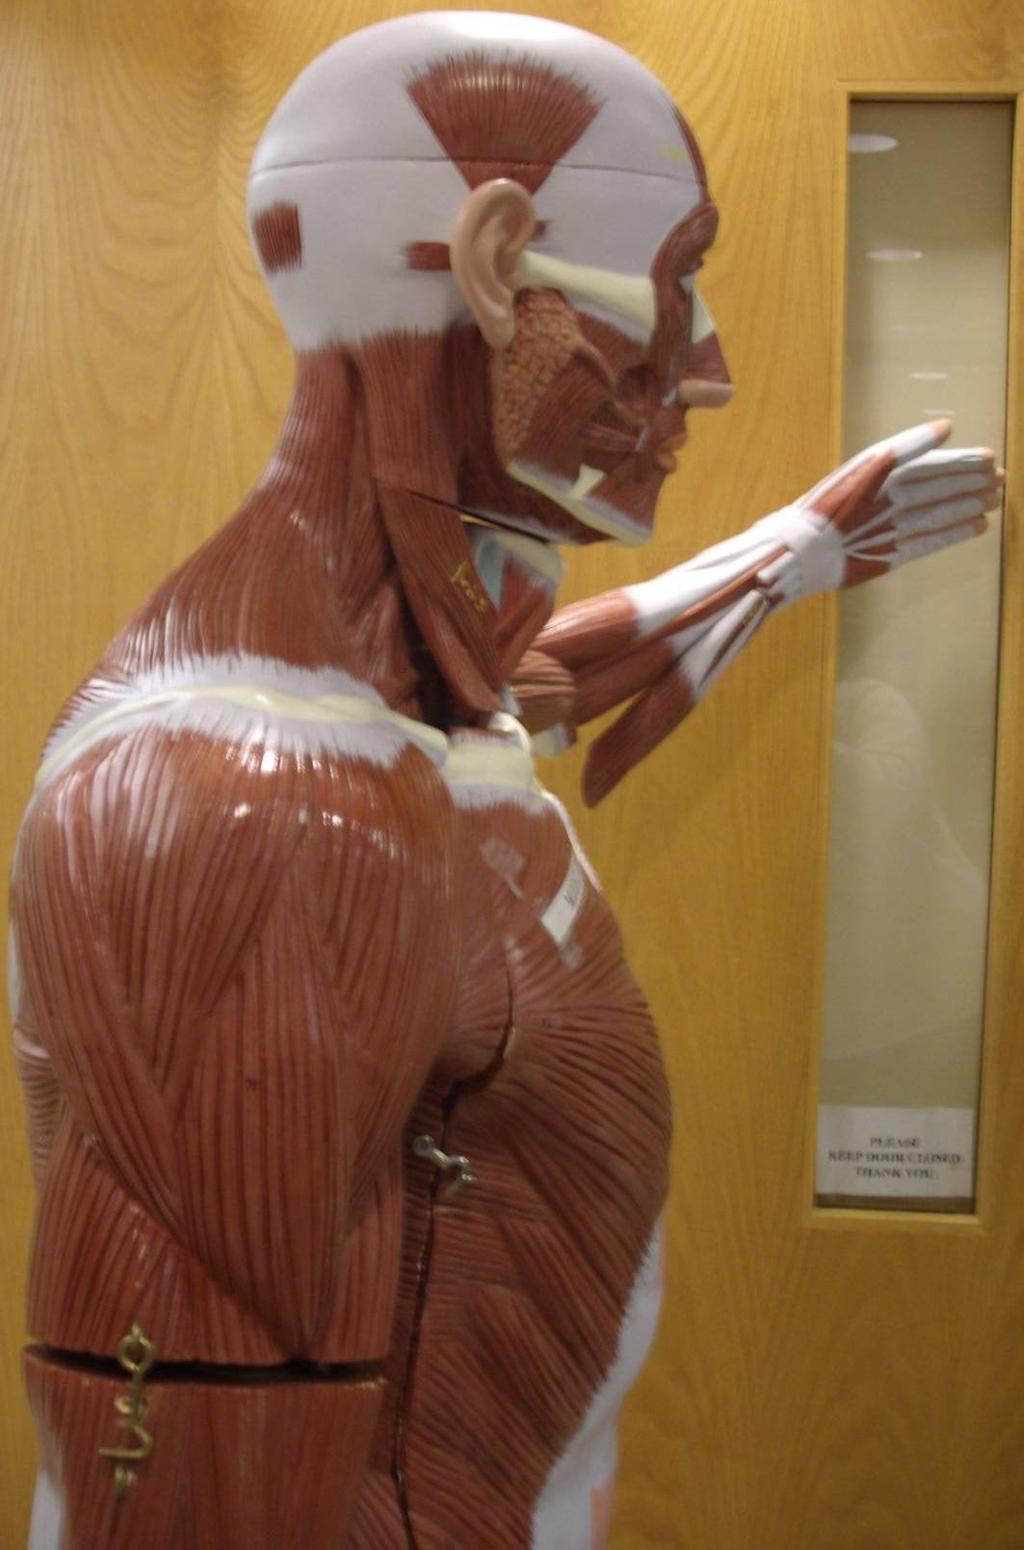 Human Muscles (Lateral View) Model 3-65 Masseter Frontalis Sternocleidomastoid Orbicularis